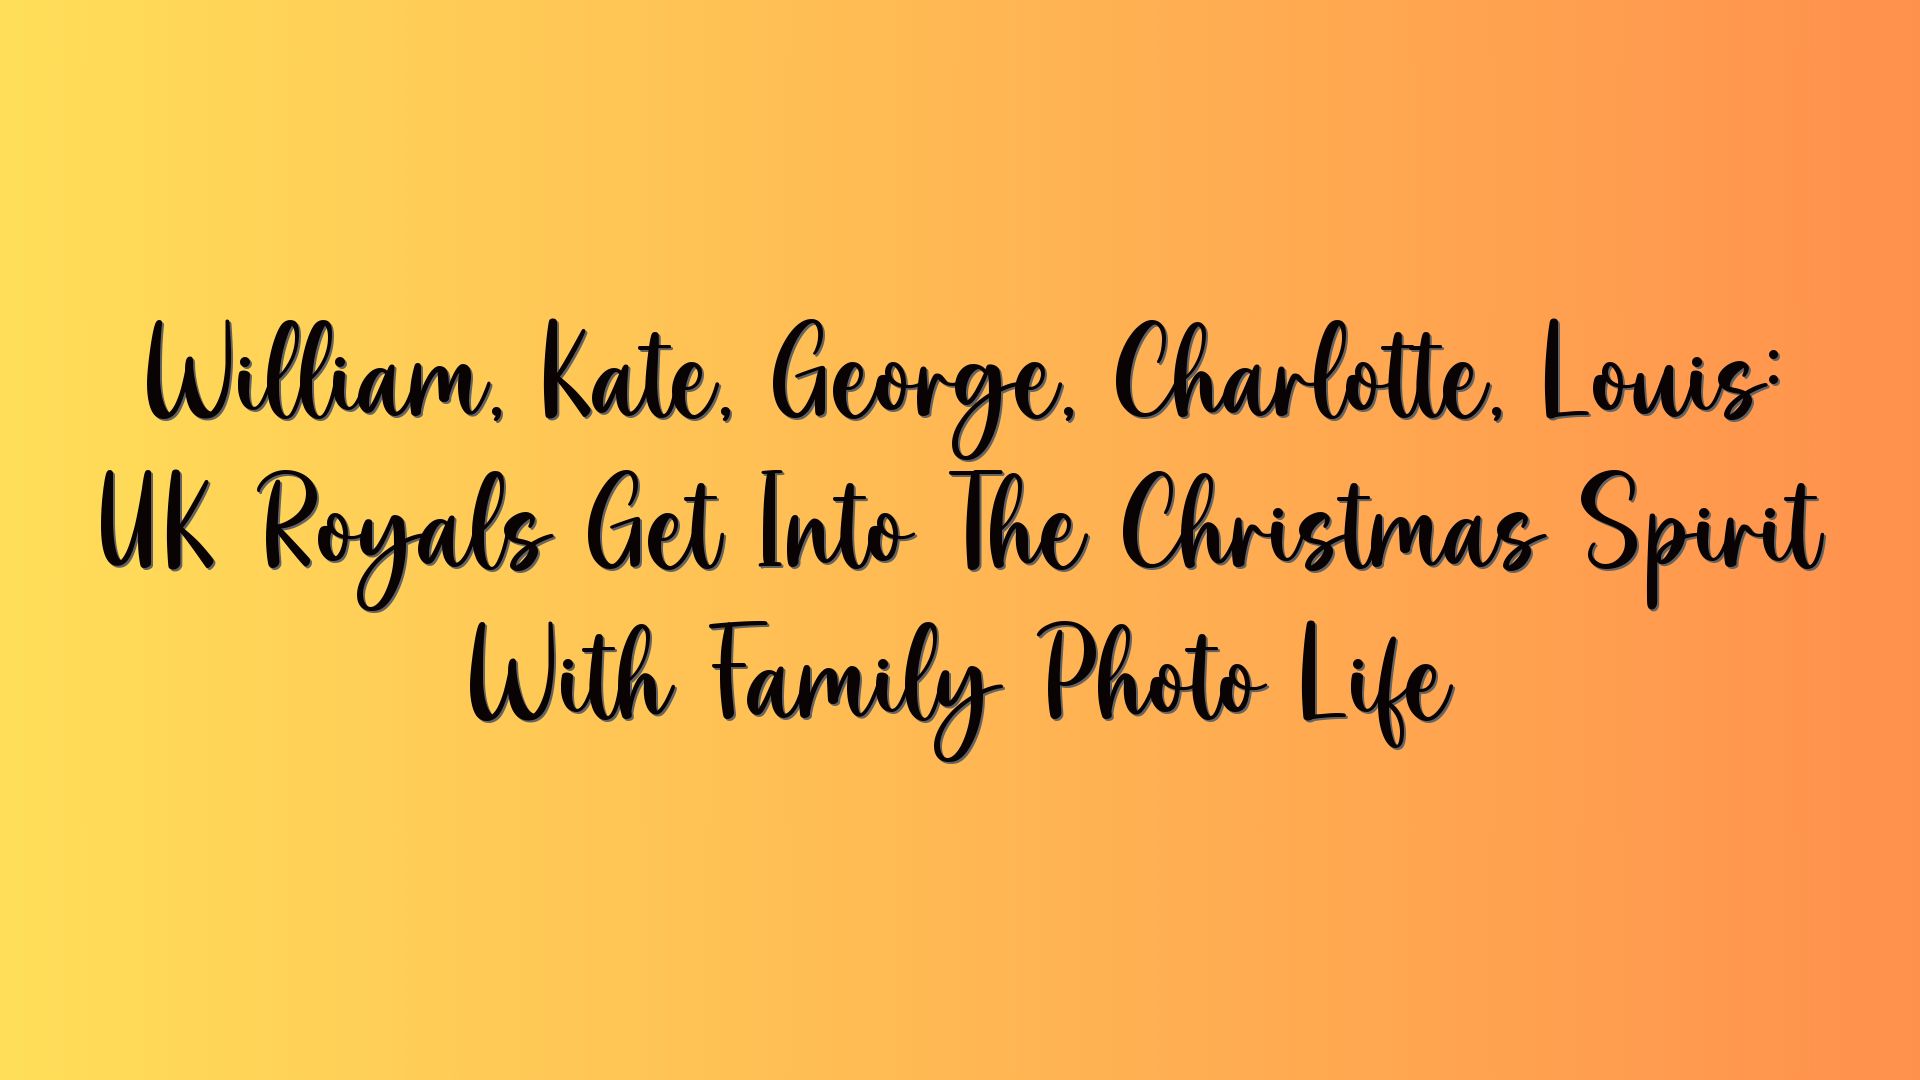 William, Kate, George, Charlotte, Louis: UK Royals Get Into The Christmas Spirit With Family Photo Life